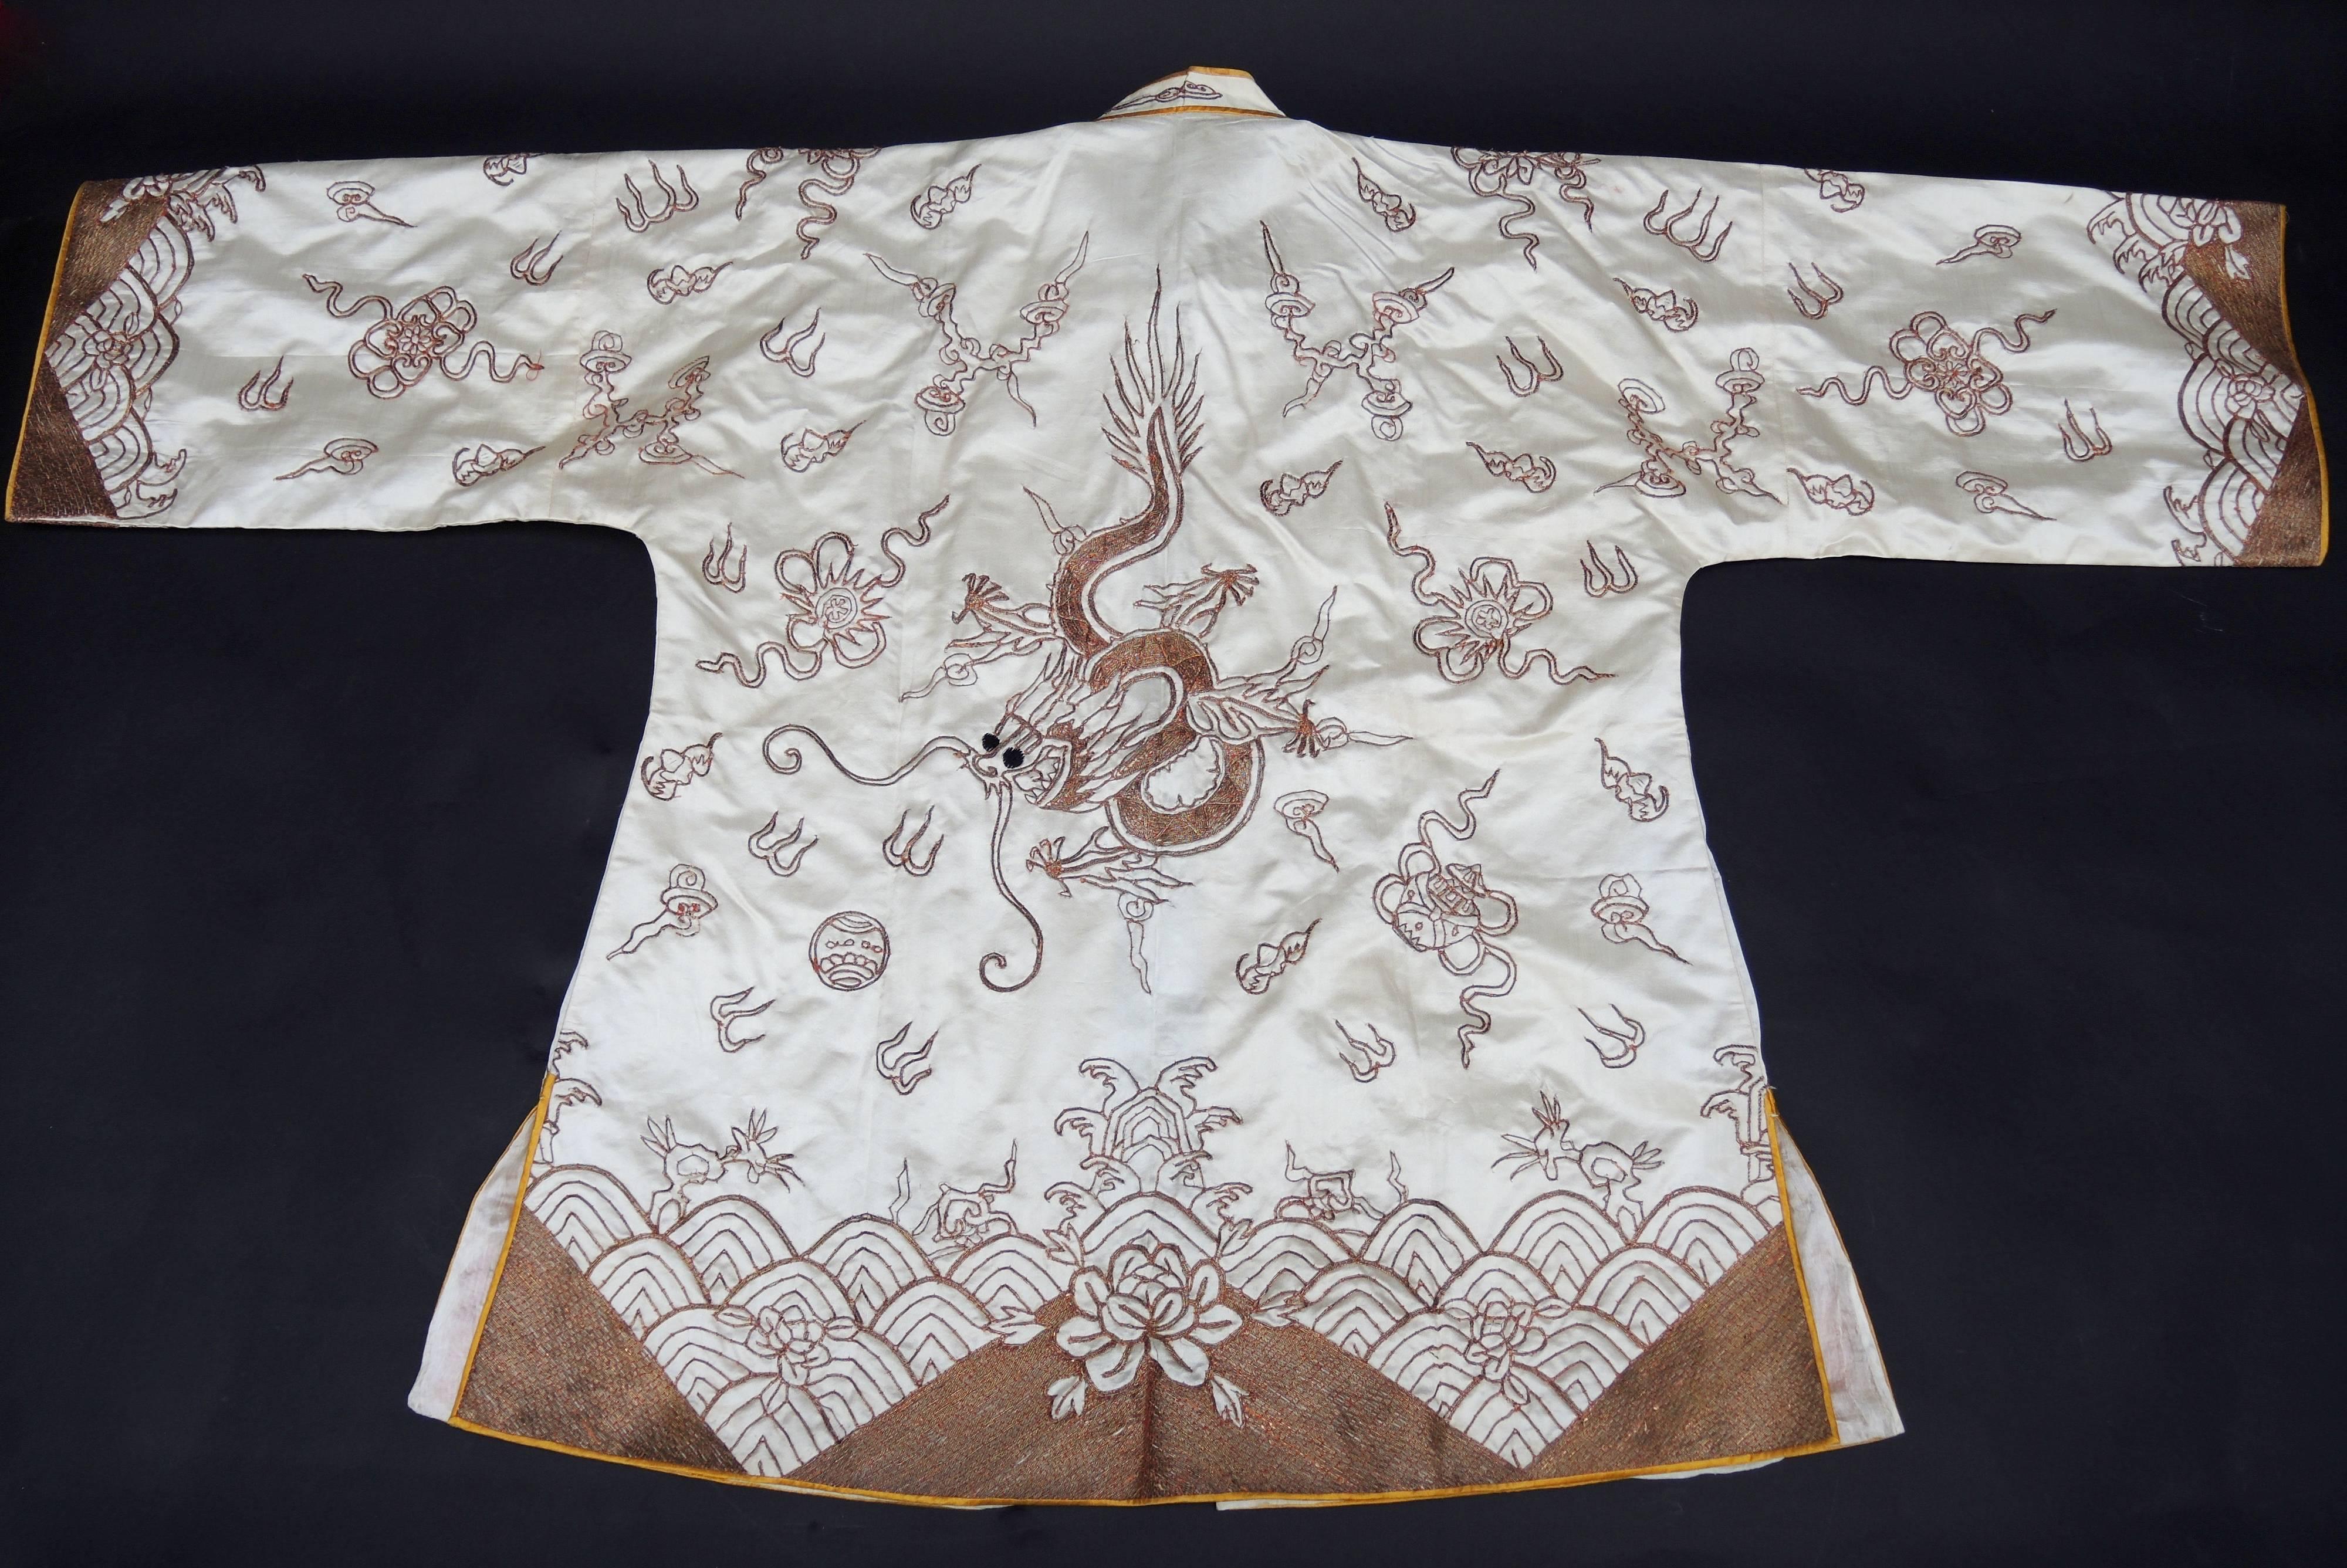 This 1940's Chinese jacket is in amazing condition and is heavily adorned with jewel like gold hand embroidery . The couching embroidery technique is accomplished by hand sewing thin pieces of paper that have been tightly wrapped in gold metal foil